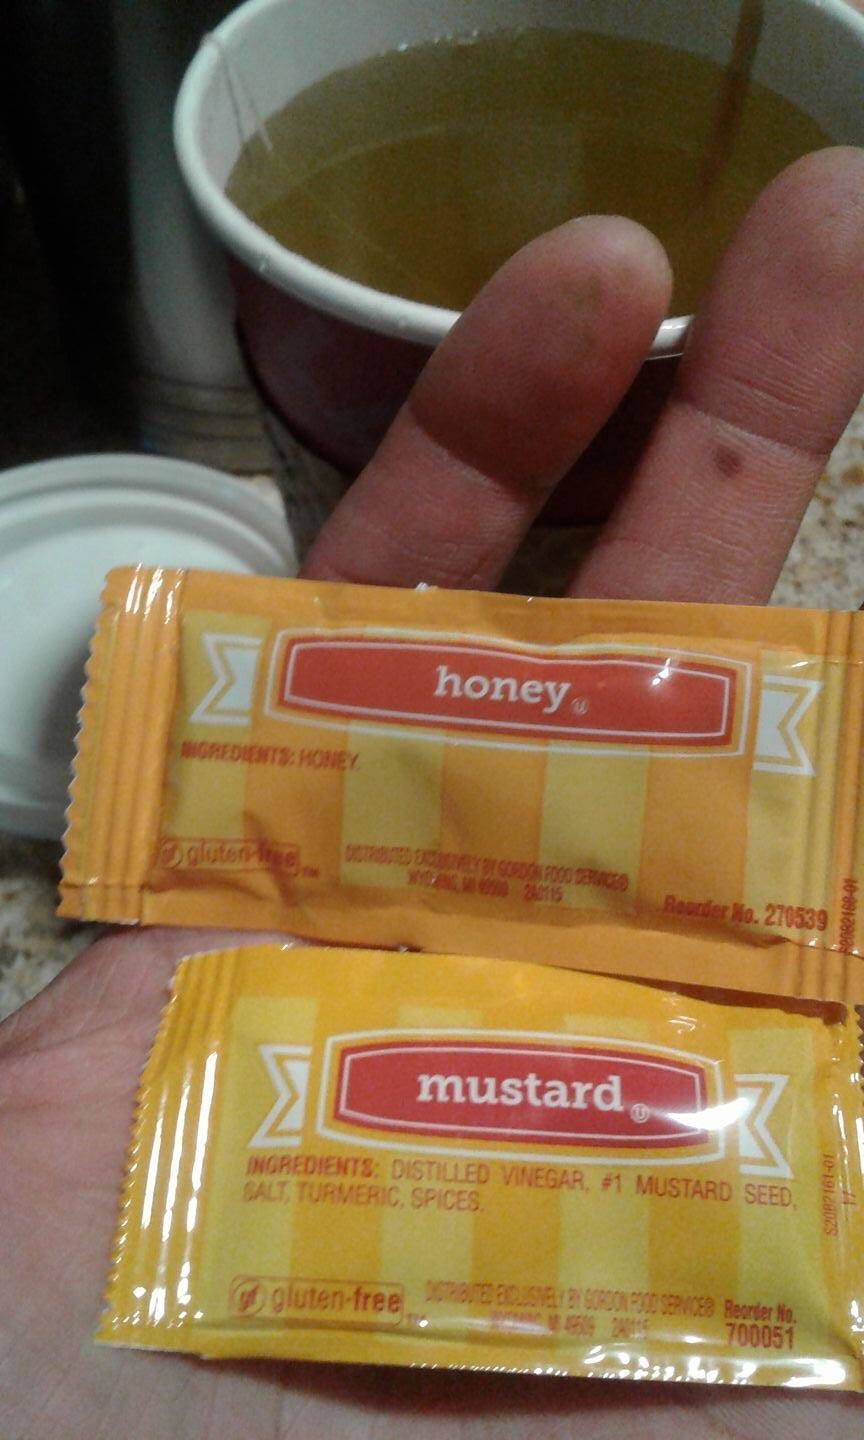 Honey and Mustard in separate packages that look very similar.